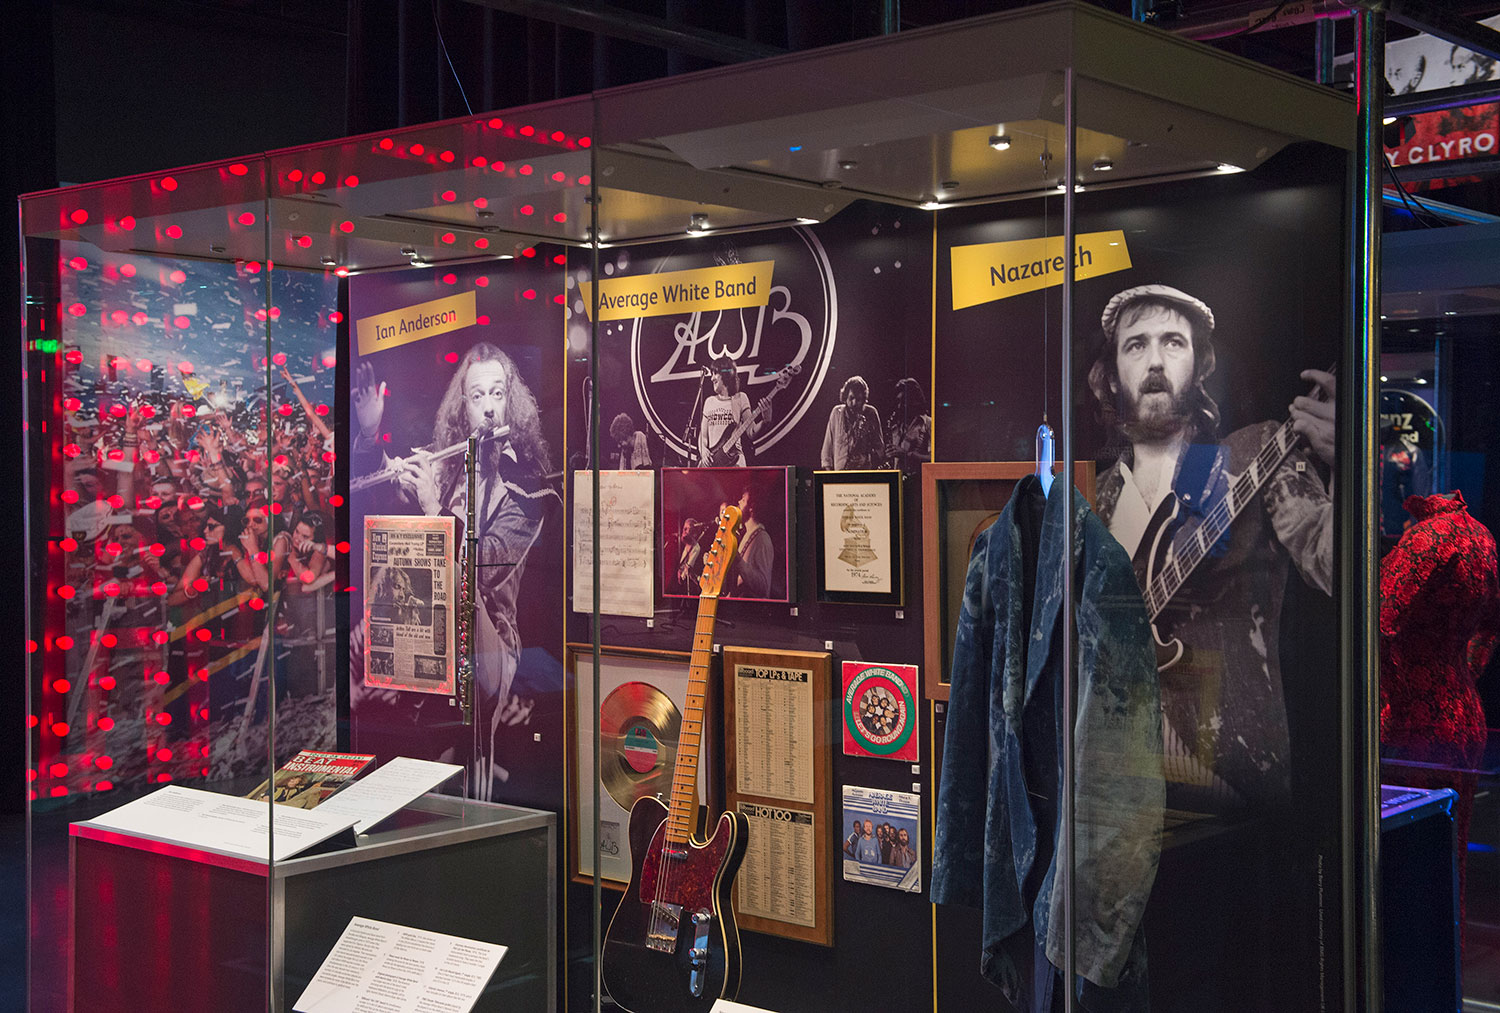 Jethro Tull and Nazareth in the Rip It Up exhibition. Photo Neil Hanna.